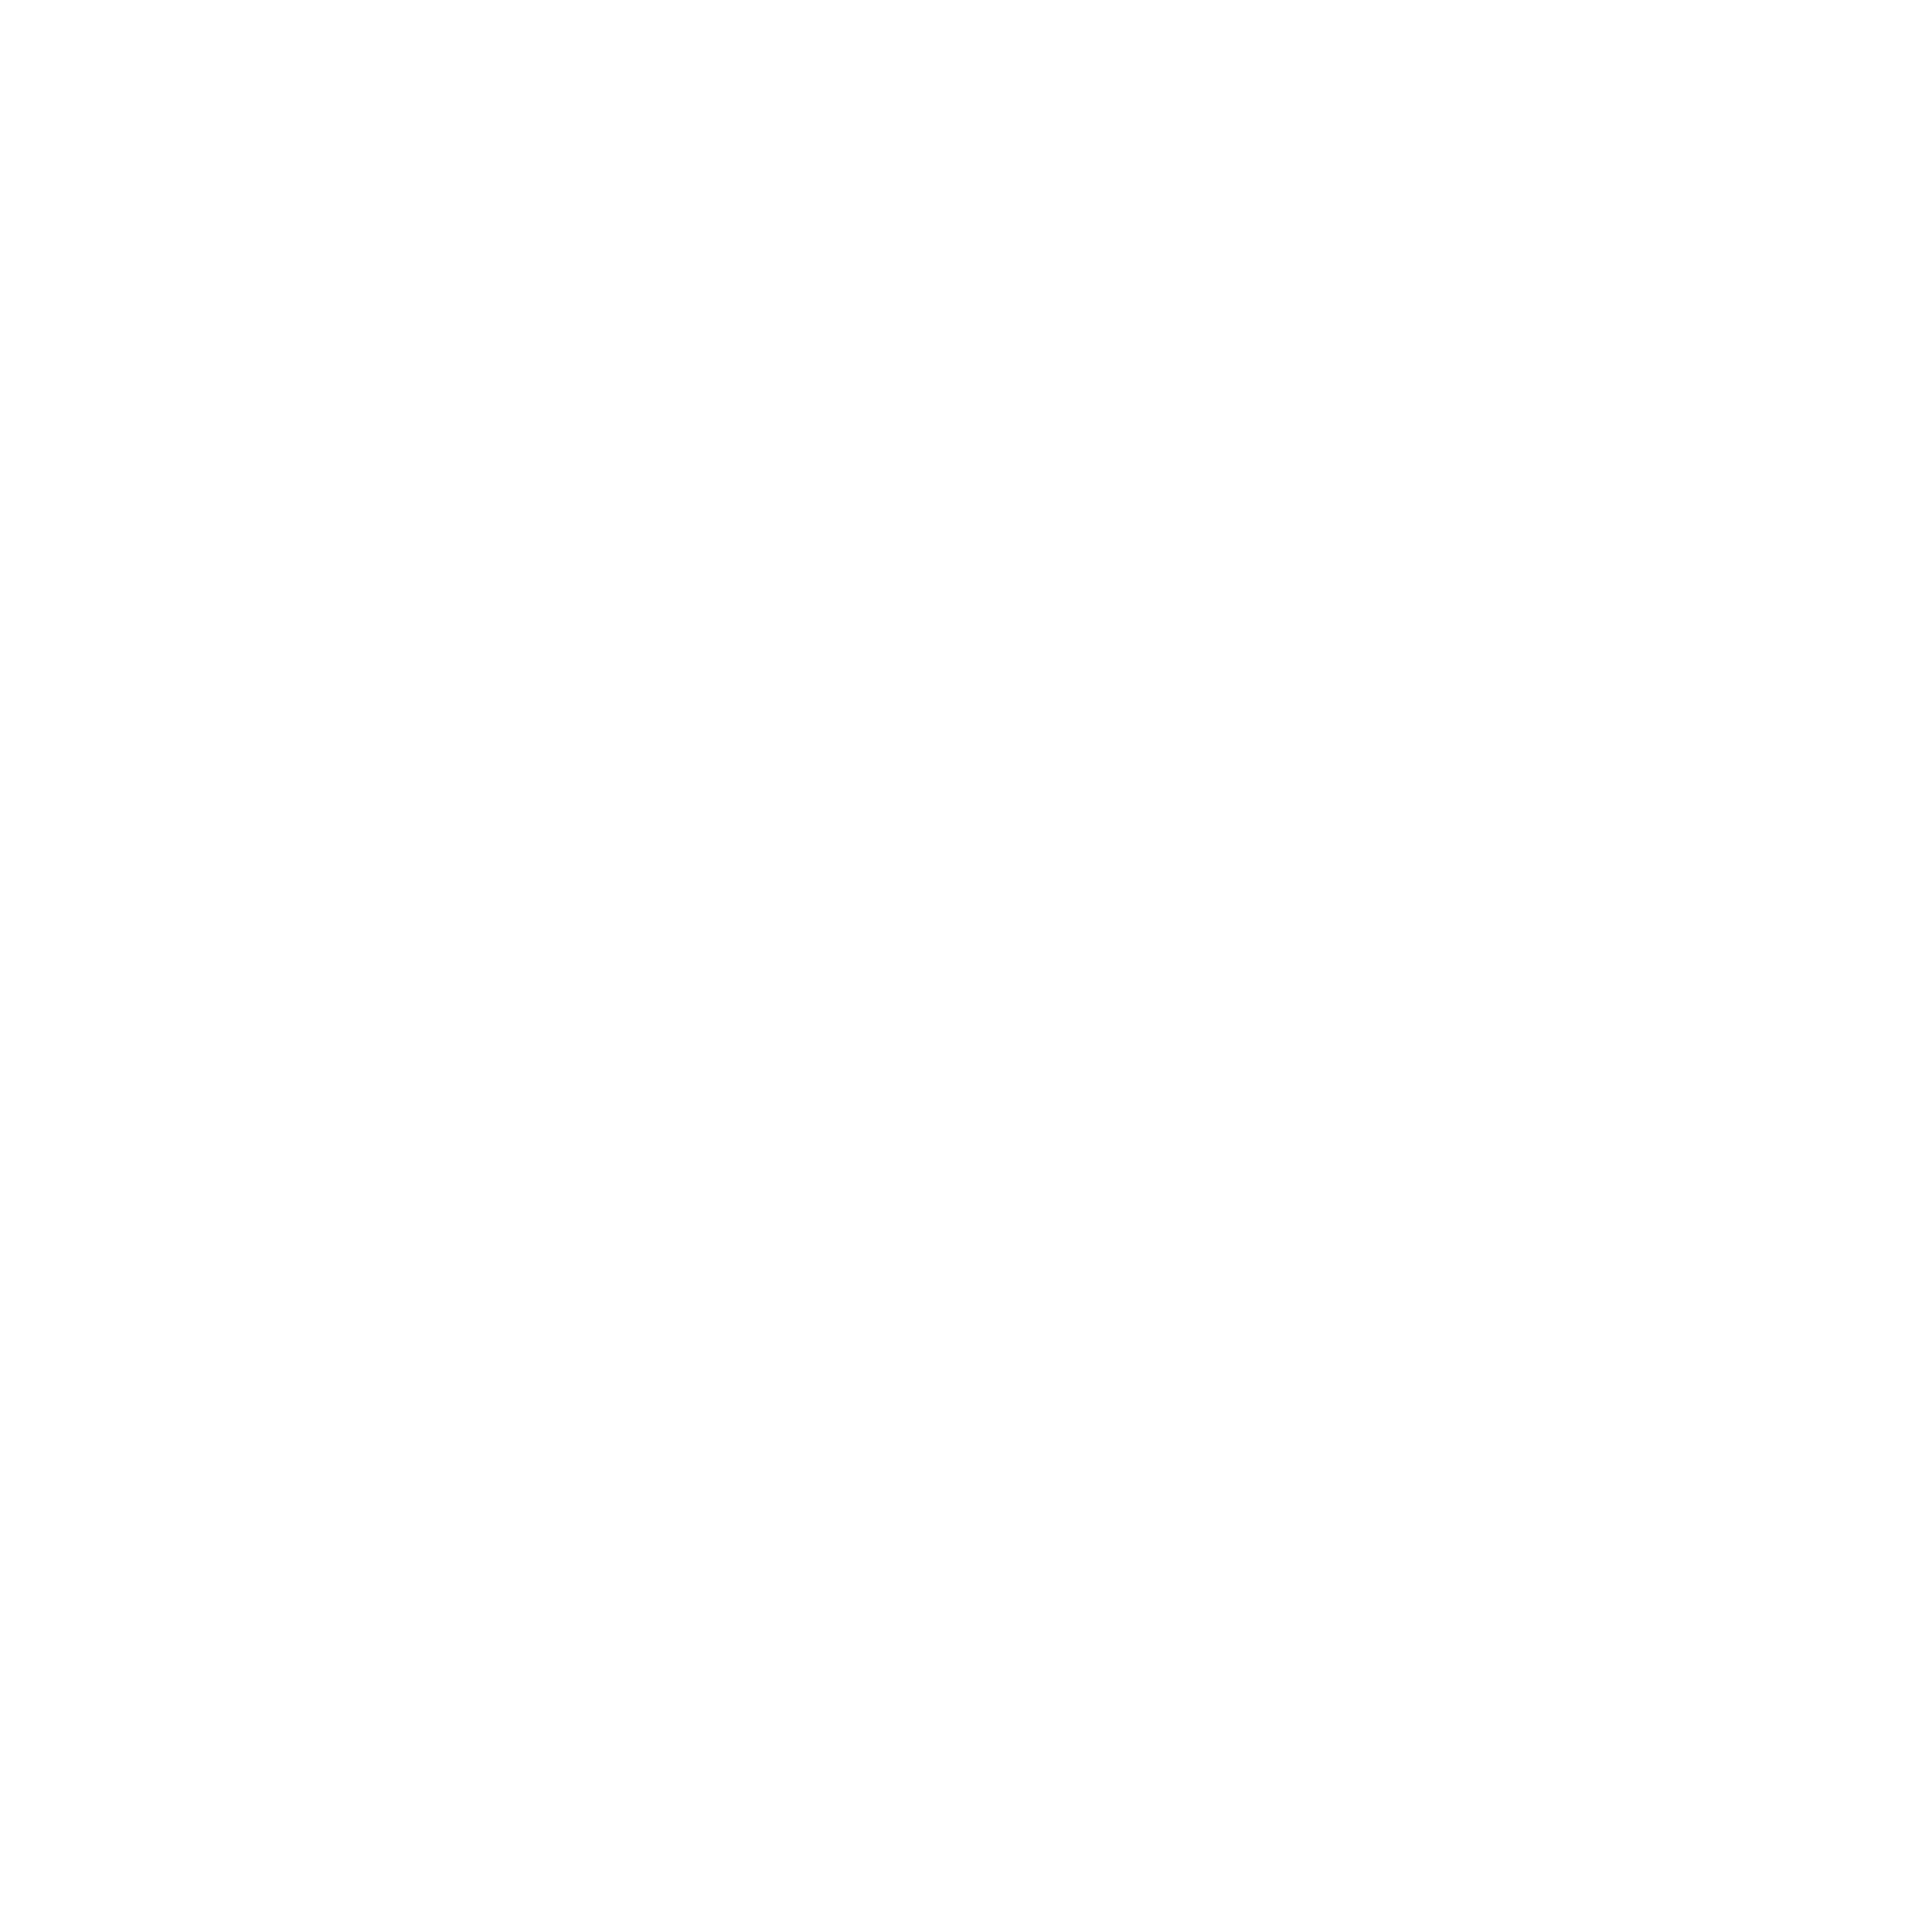 Gush Contractors – Quality Construction & Remodeling Services